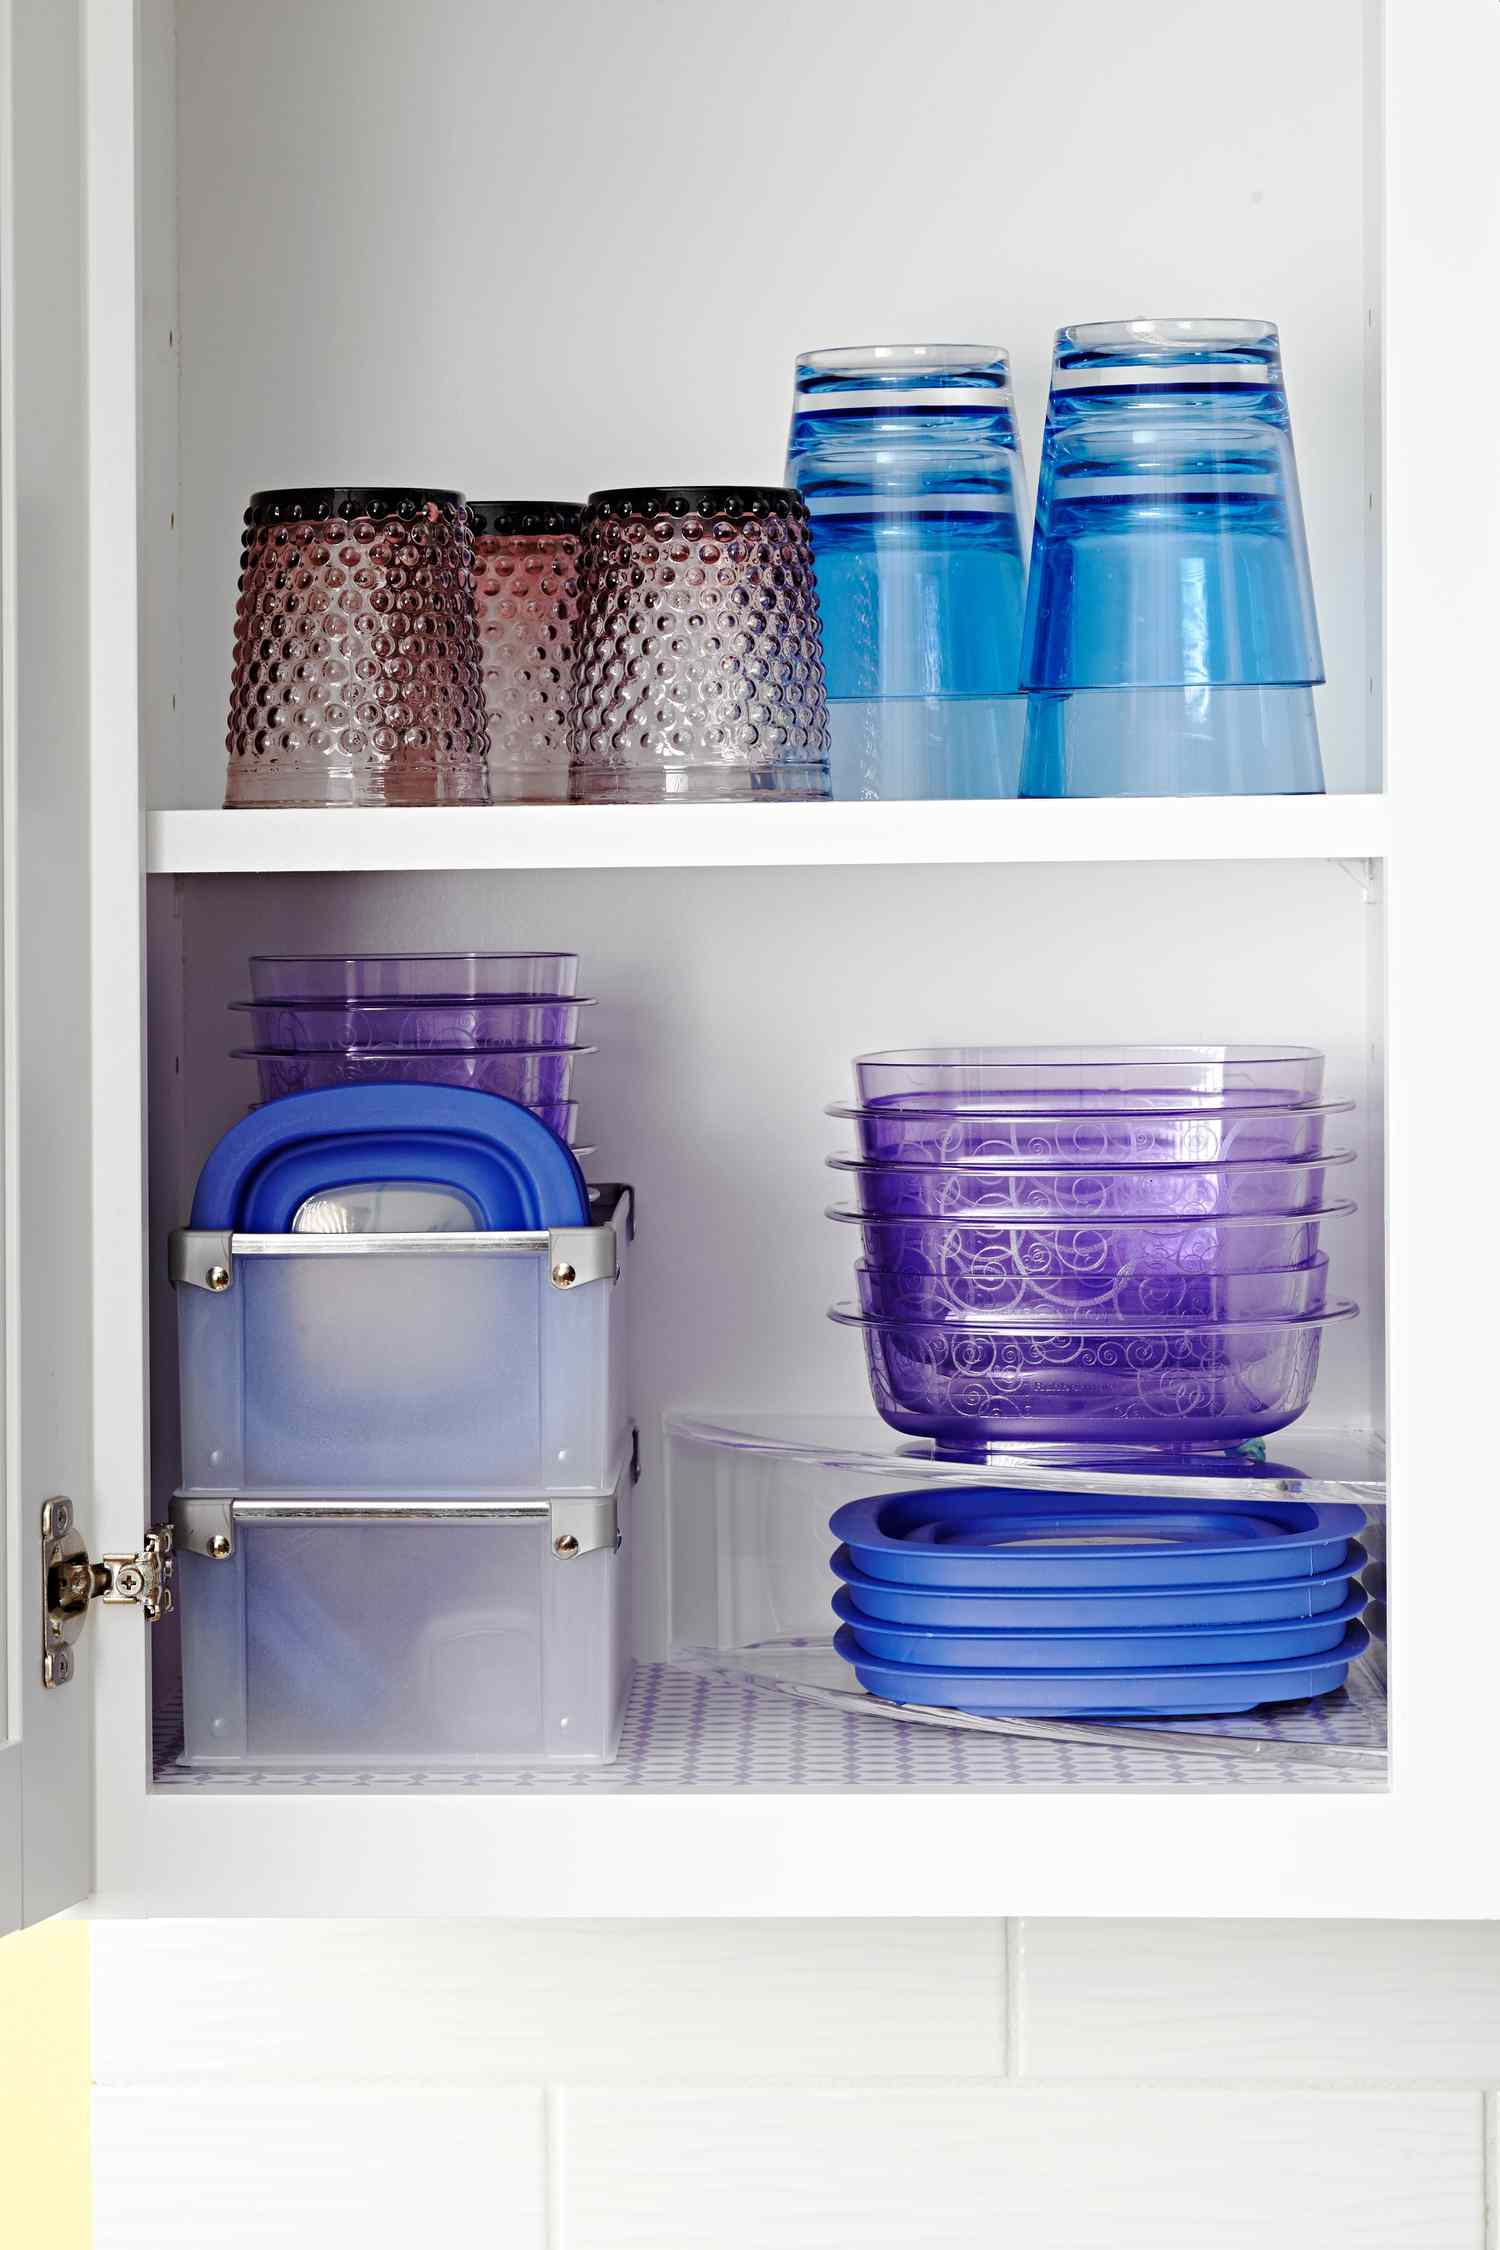 organized cupboard of blue and purple food storage containers